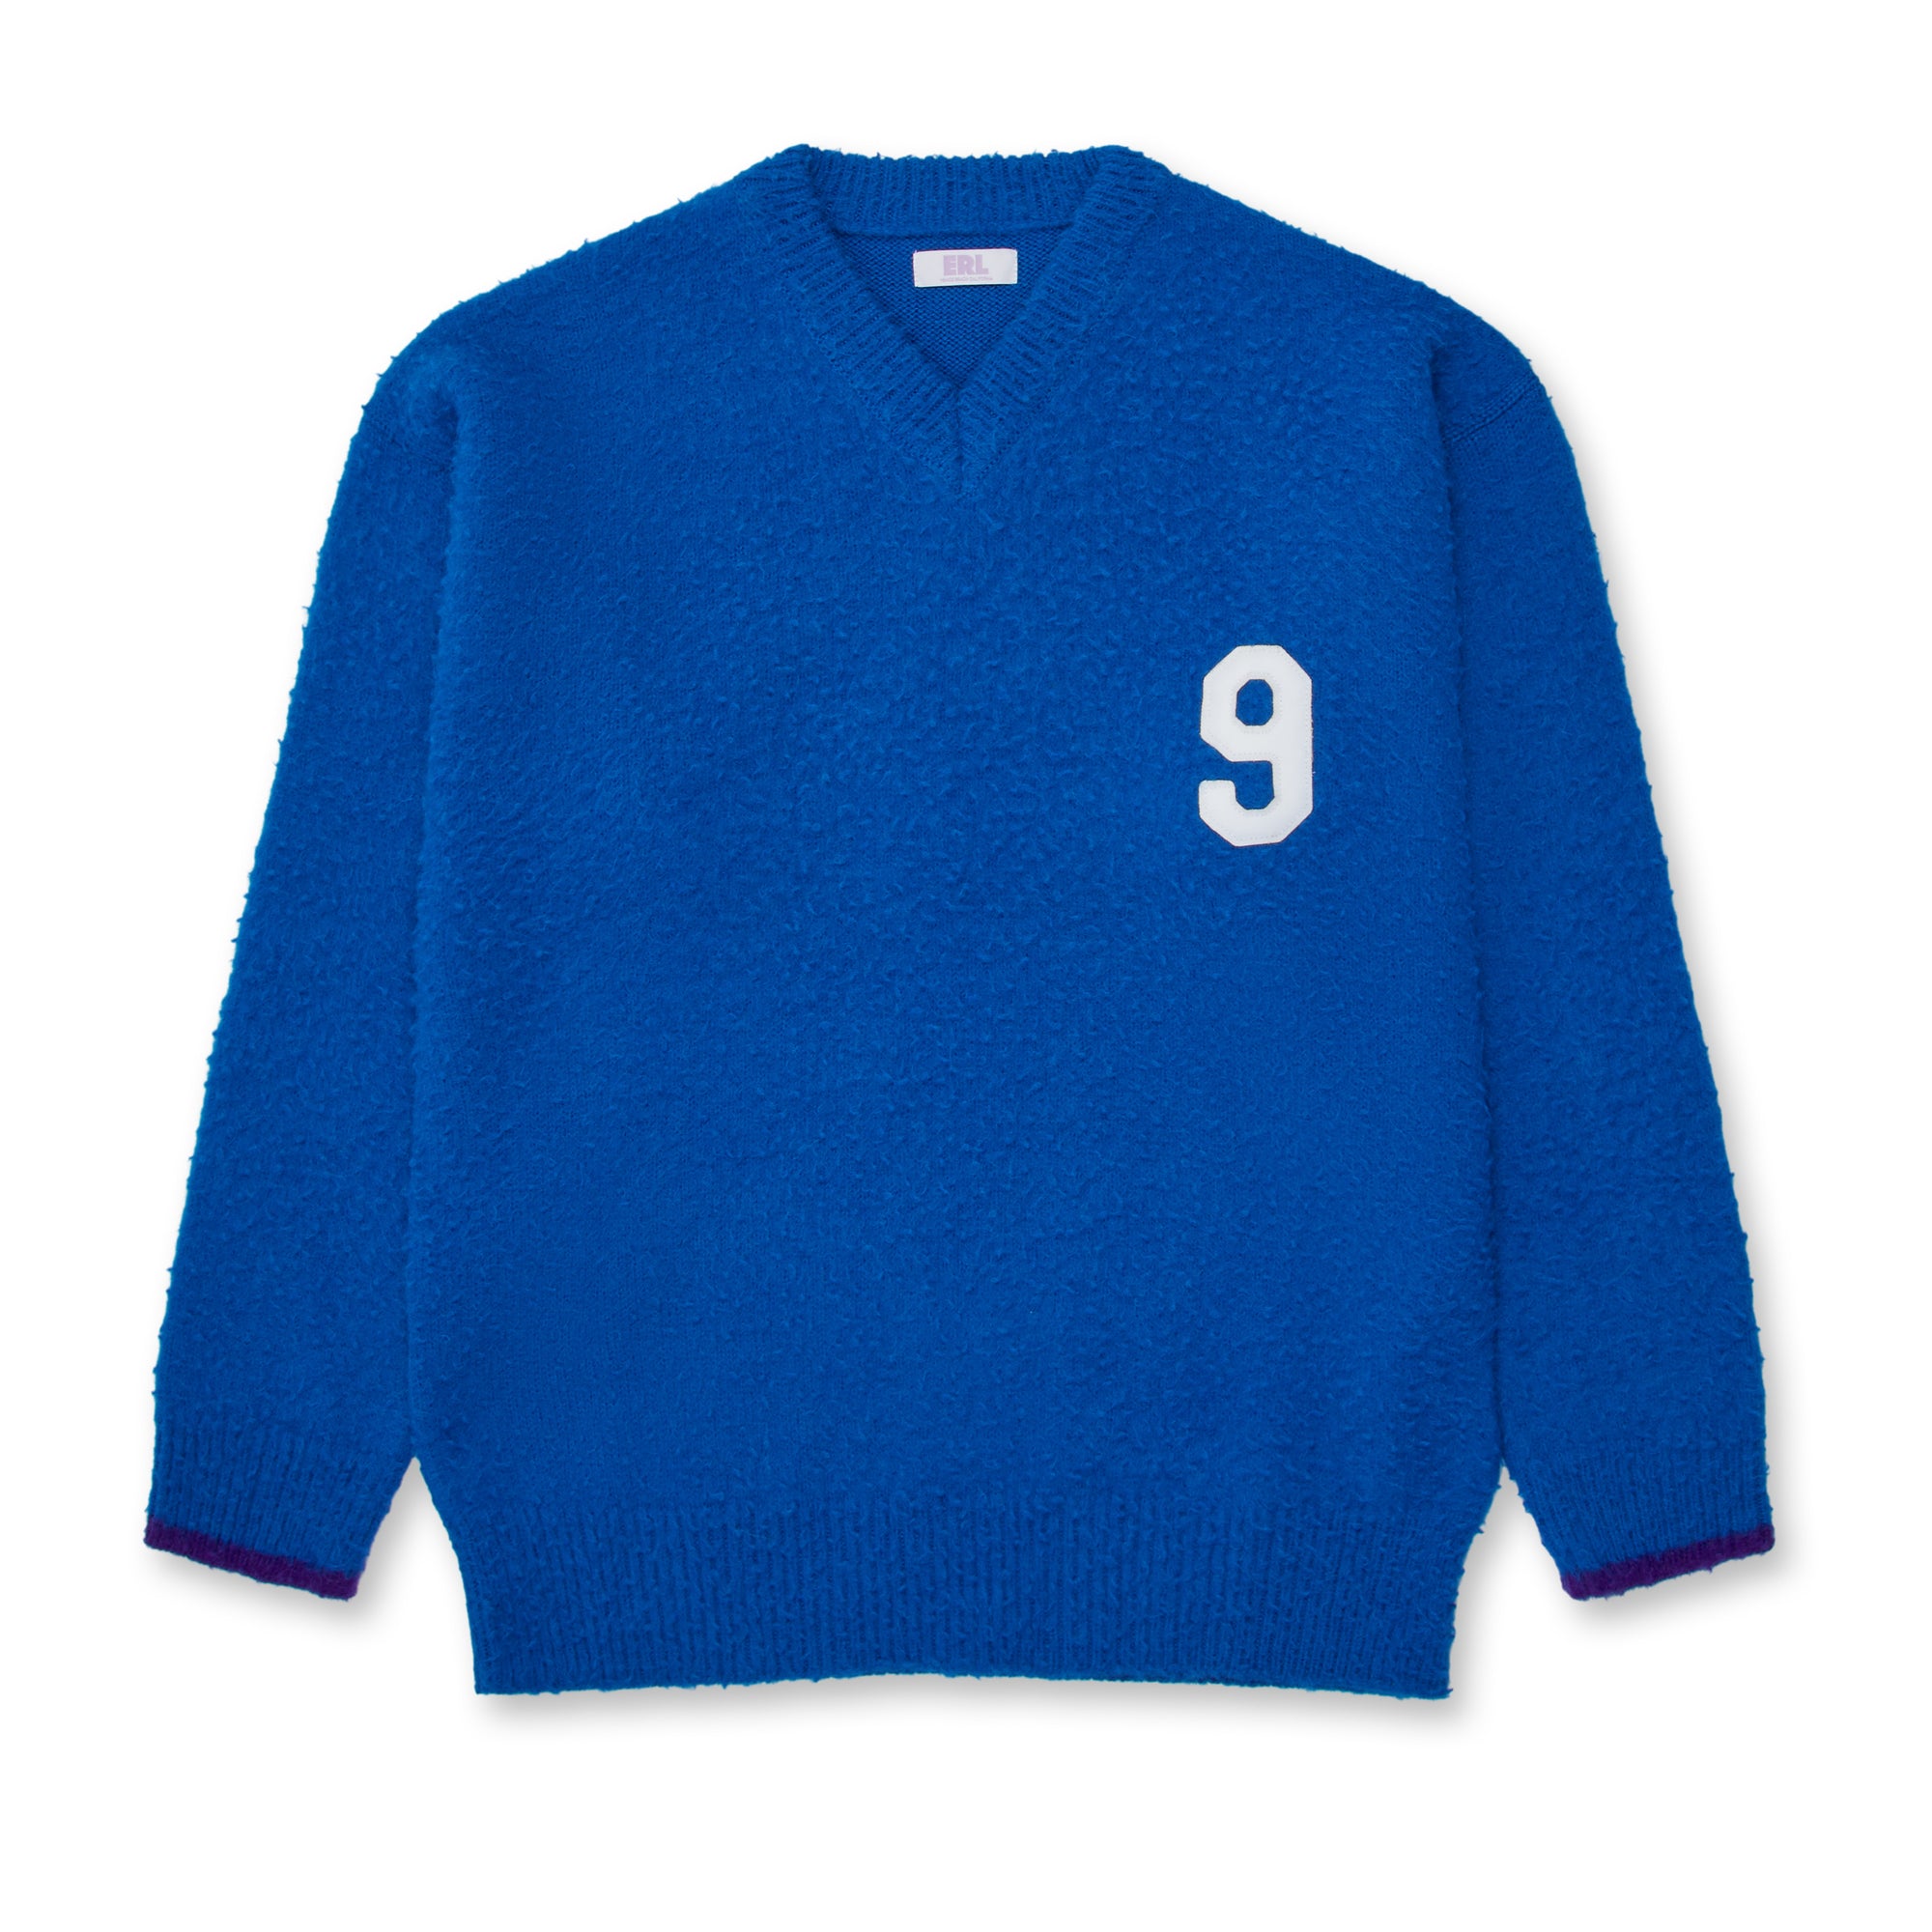 ERL - Football V-Neck Sweater - (Blue) view 1